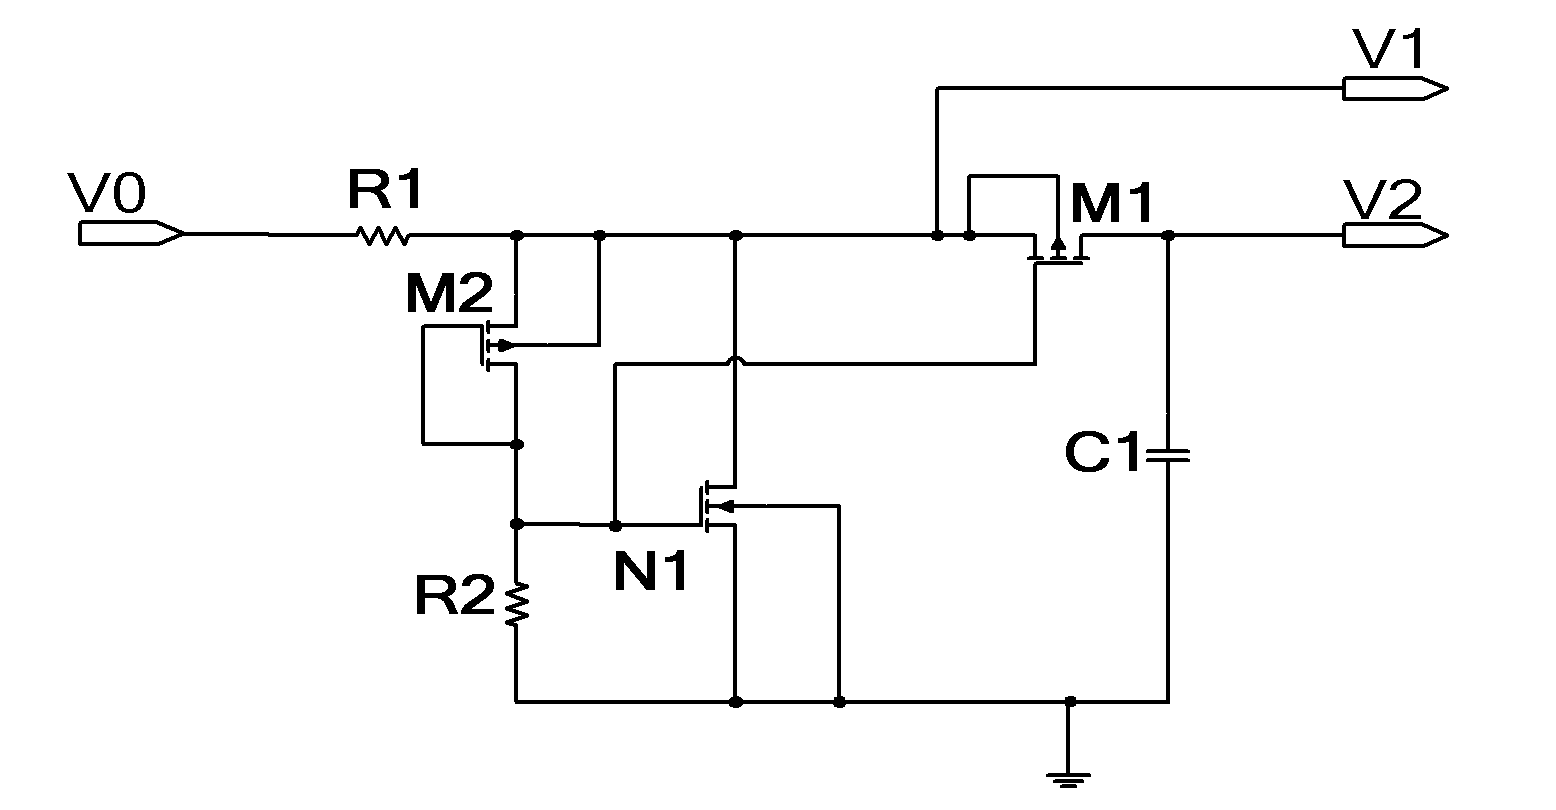 Demodulator circuit for the UHF (Ultrahigh Frequency) radio frequency identification label chip